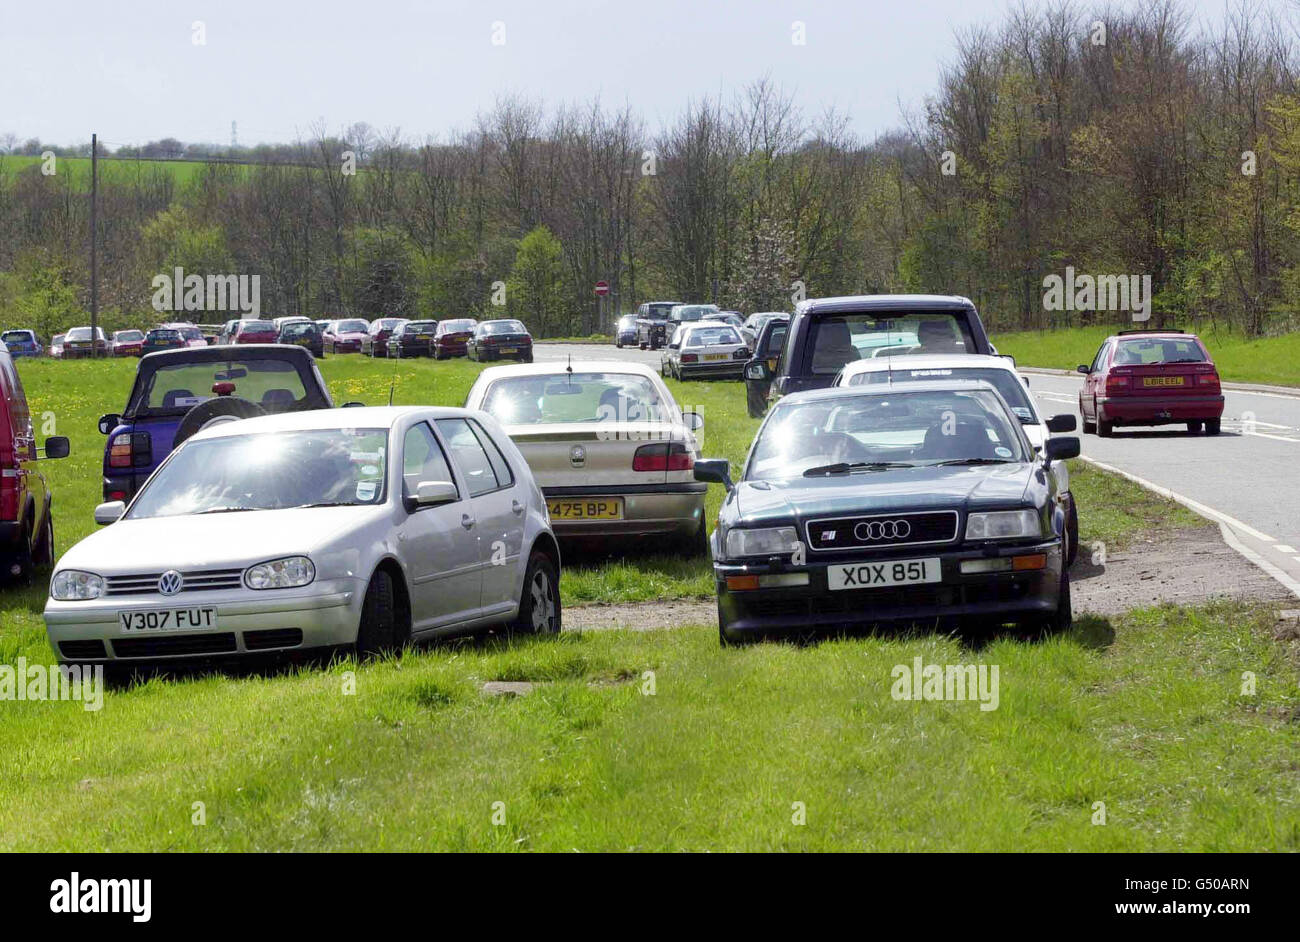 Parked cars on the A43, 7 miles from Silverstone, as traffic jams stretching more than 10 to 15 miles built up on routes into the Northamptonshire race track on the day of the British Grand Prix, forcing drivers to walk to the race. * ...when they realised they were unable to get to the track on time. Stock Photo